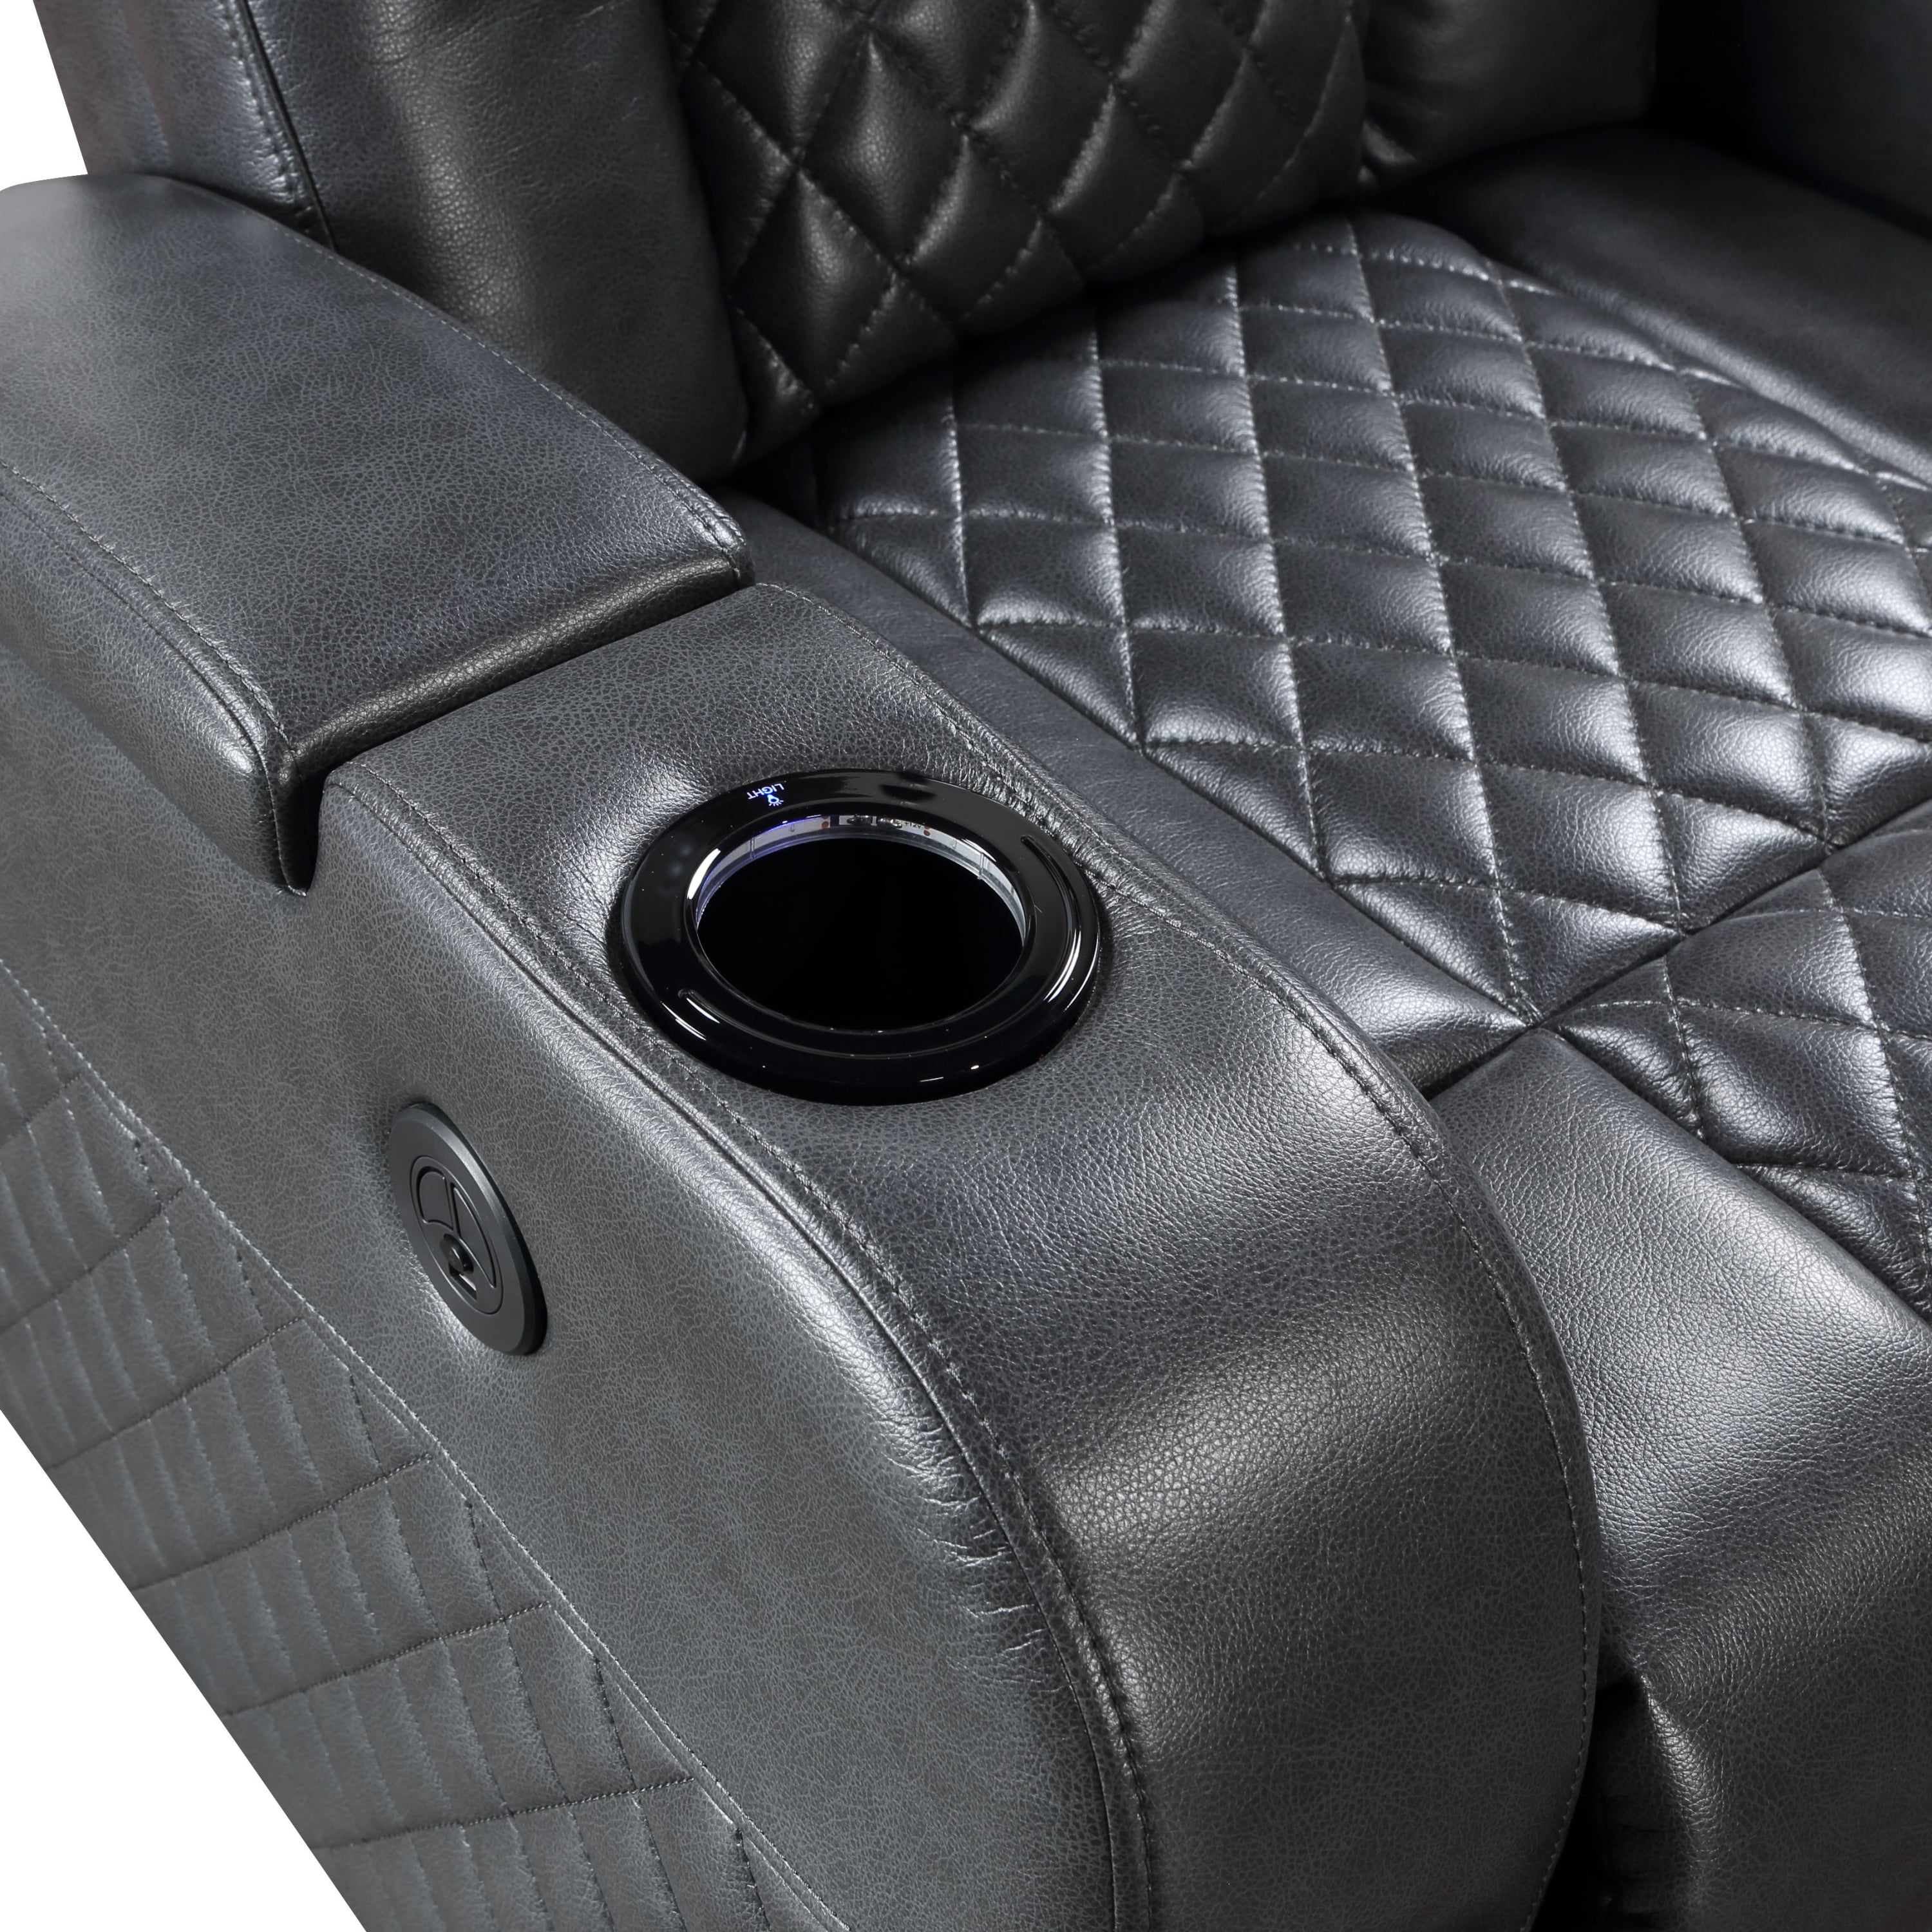 Power Motion Recliner w/Bluetooth Speaker & Cooling Cup Holder